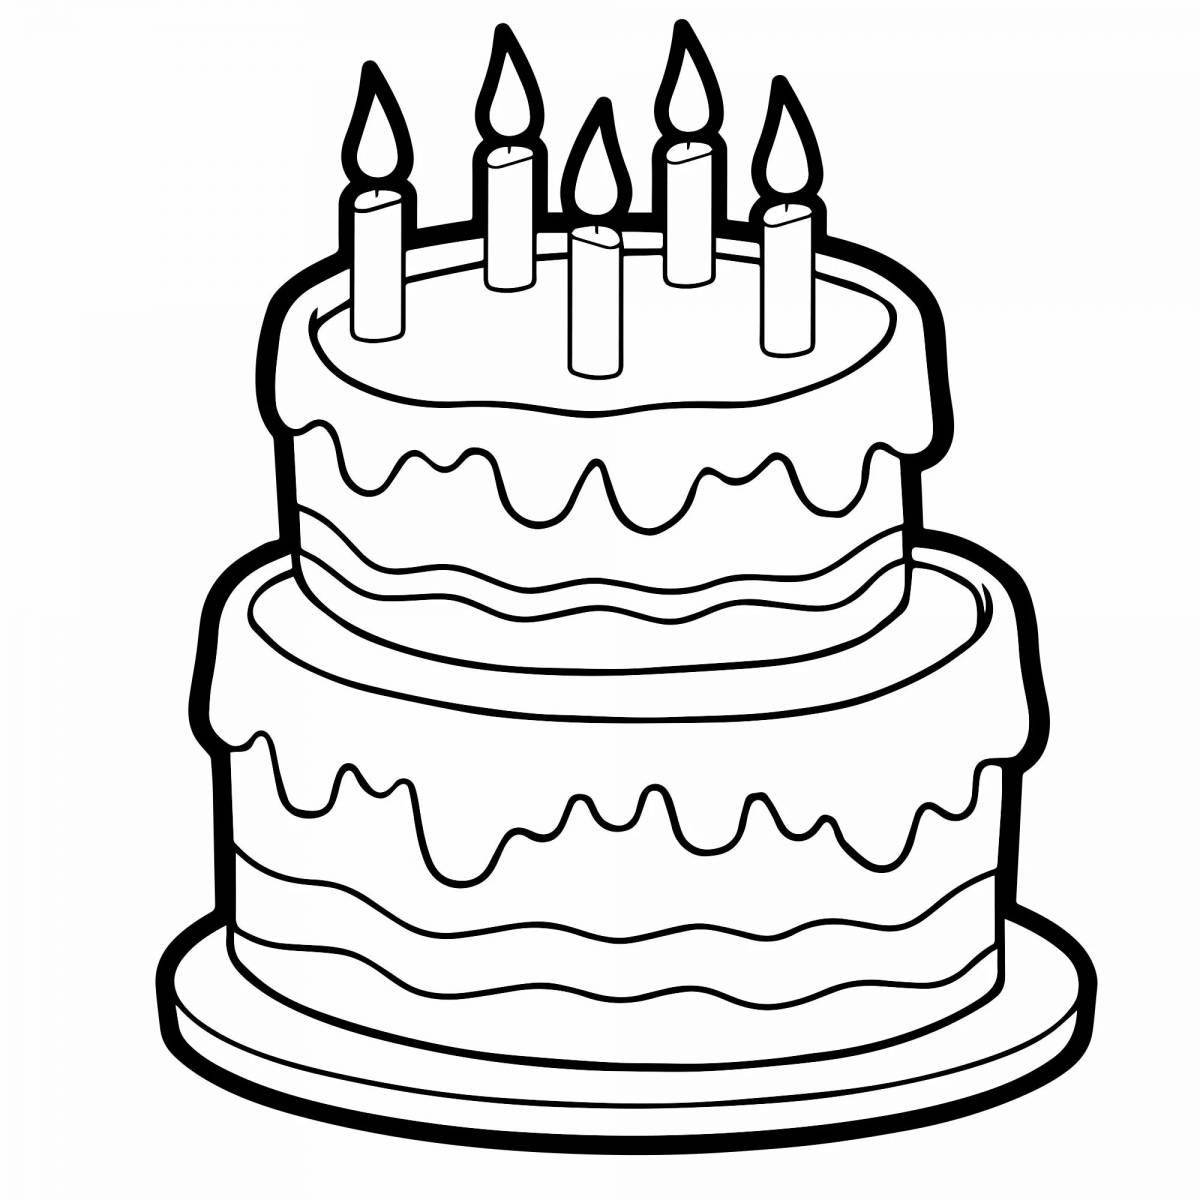 Colour cake coloring page for 3-4 year olds